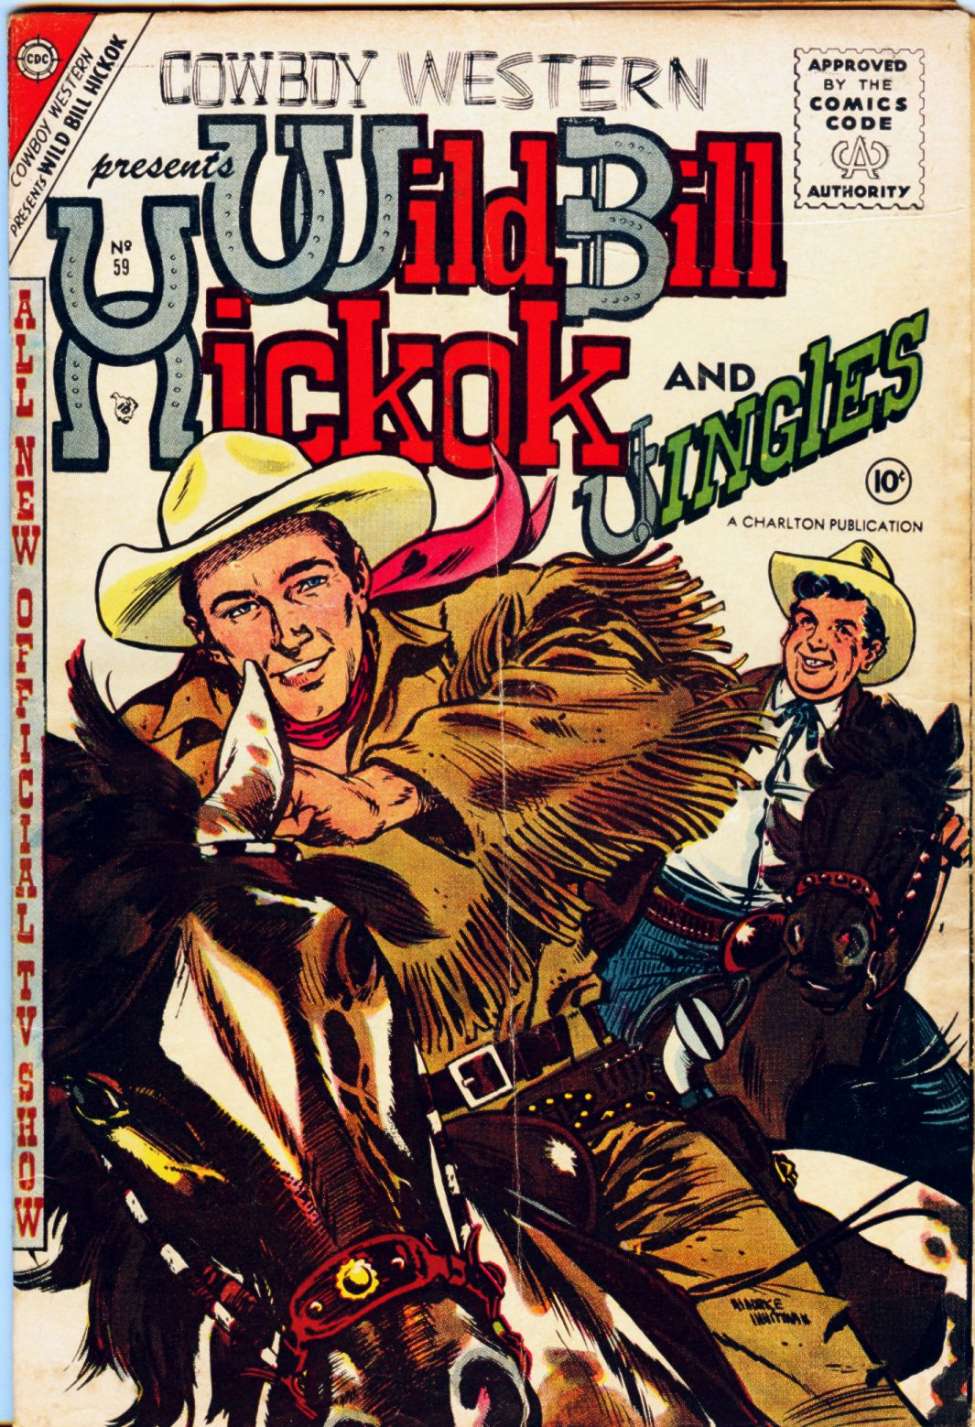 Book Cover For Cowboy Western 59